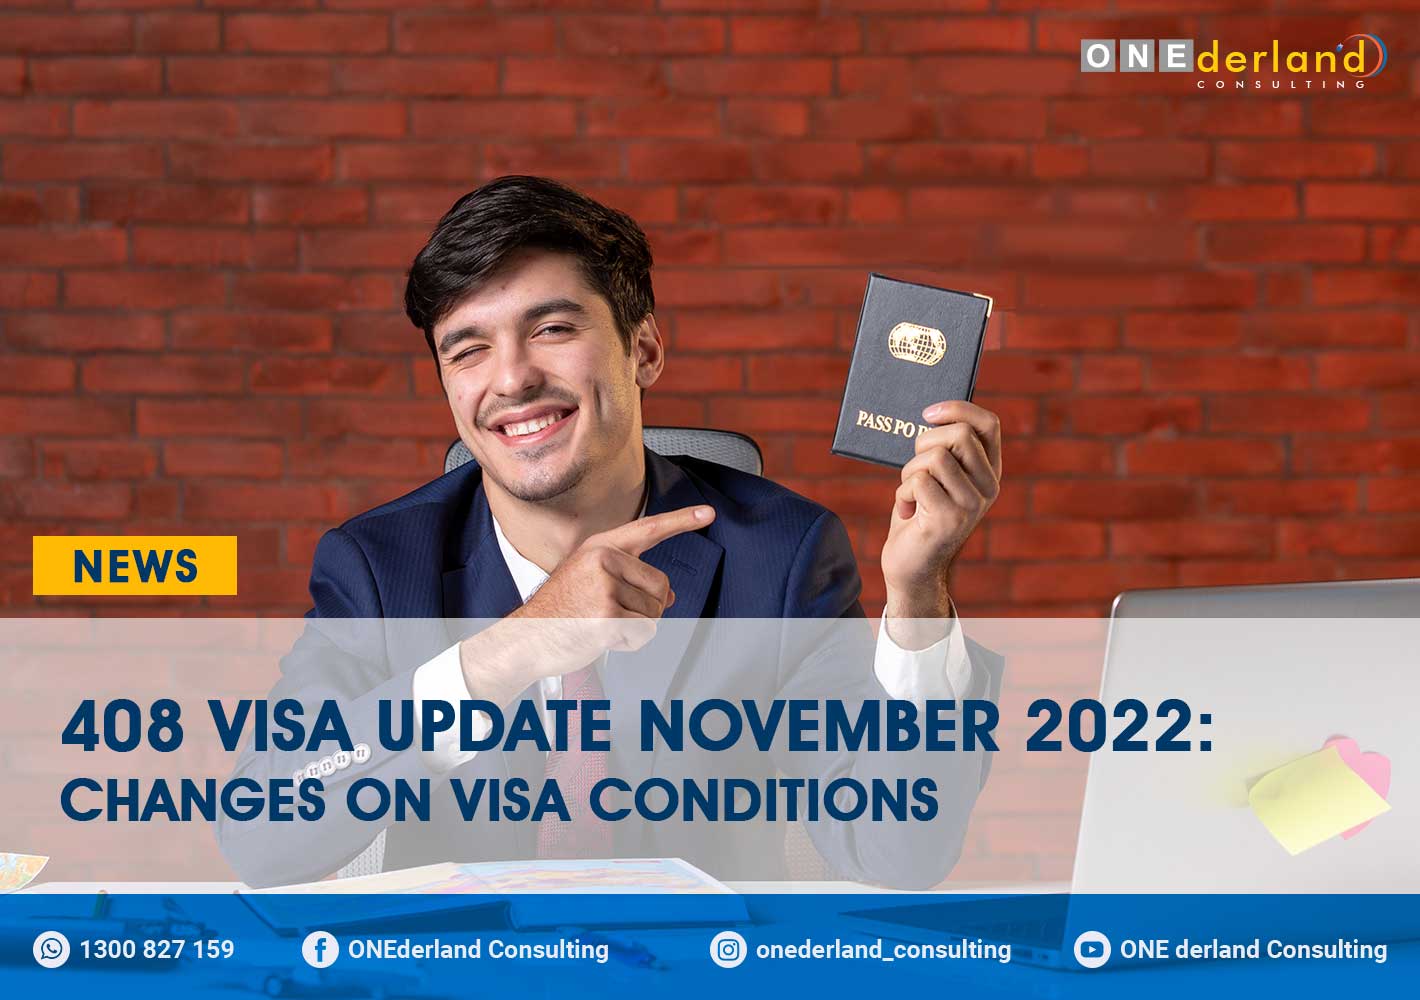 Changes on 408 Visa Conditions in November 2022